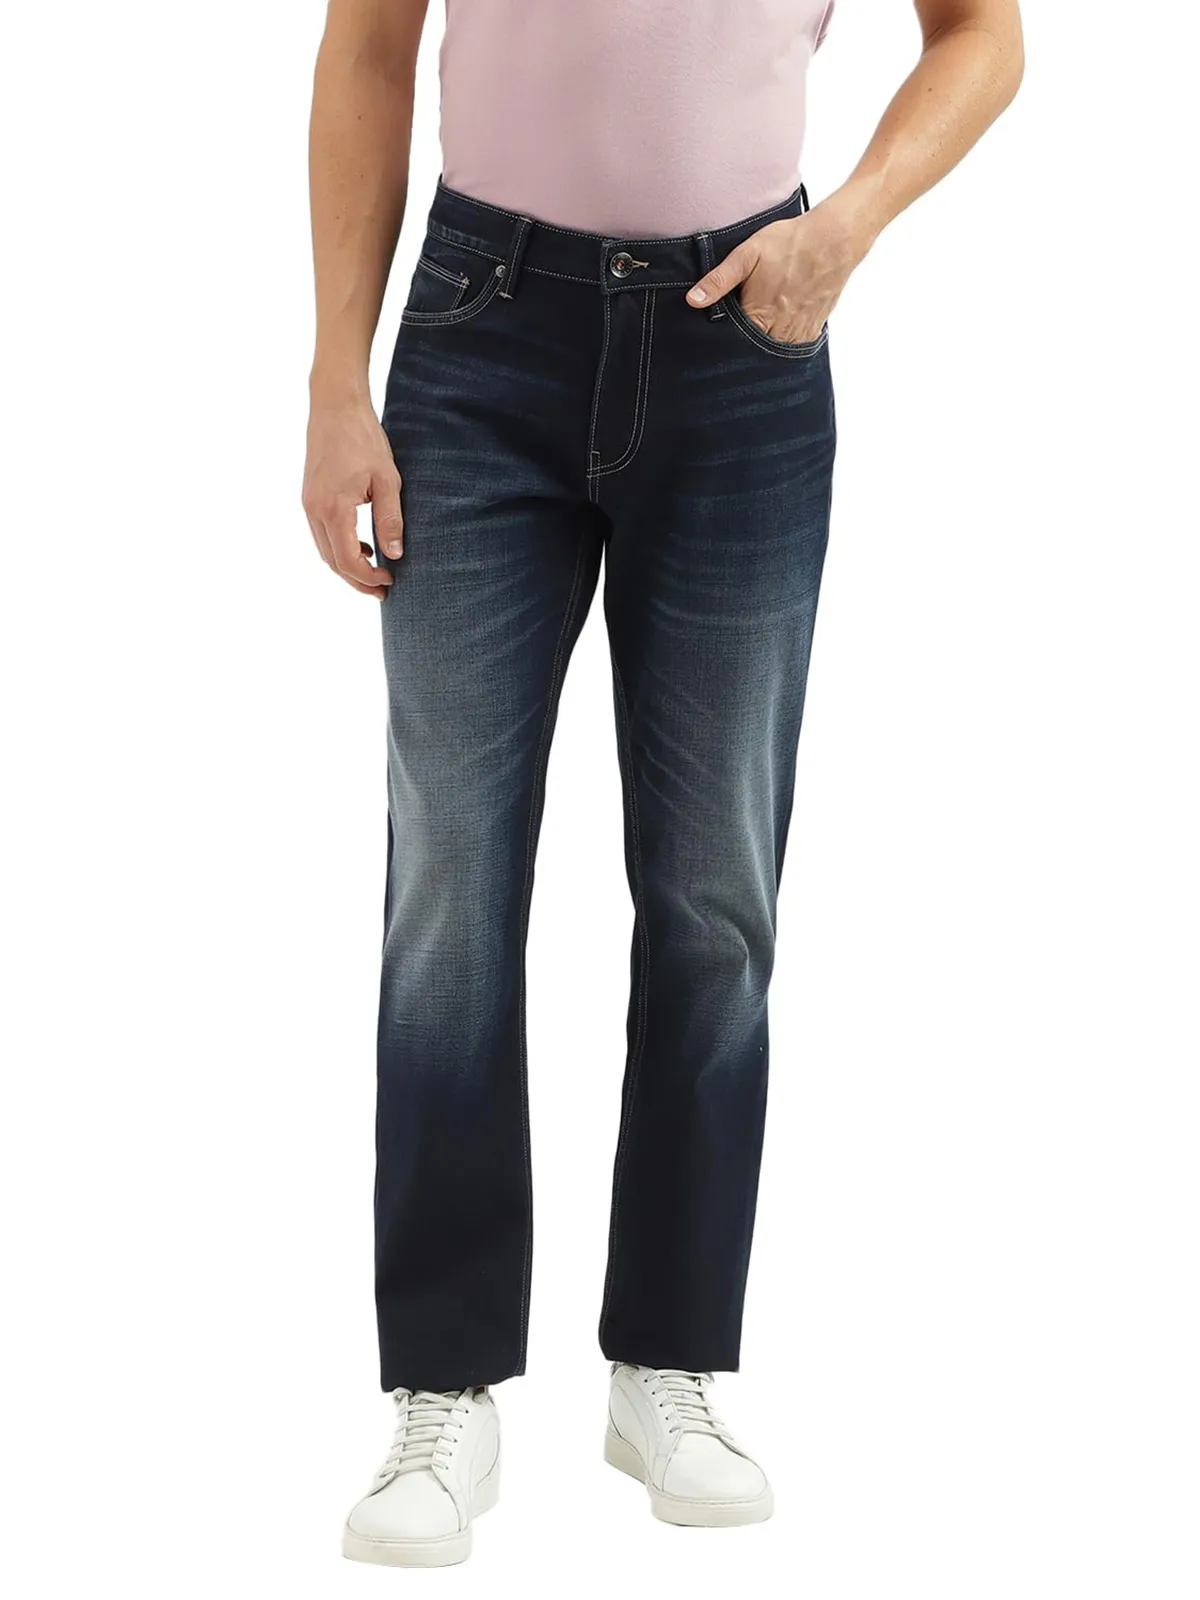 UCB dark navy washed skinny fit jeans